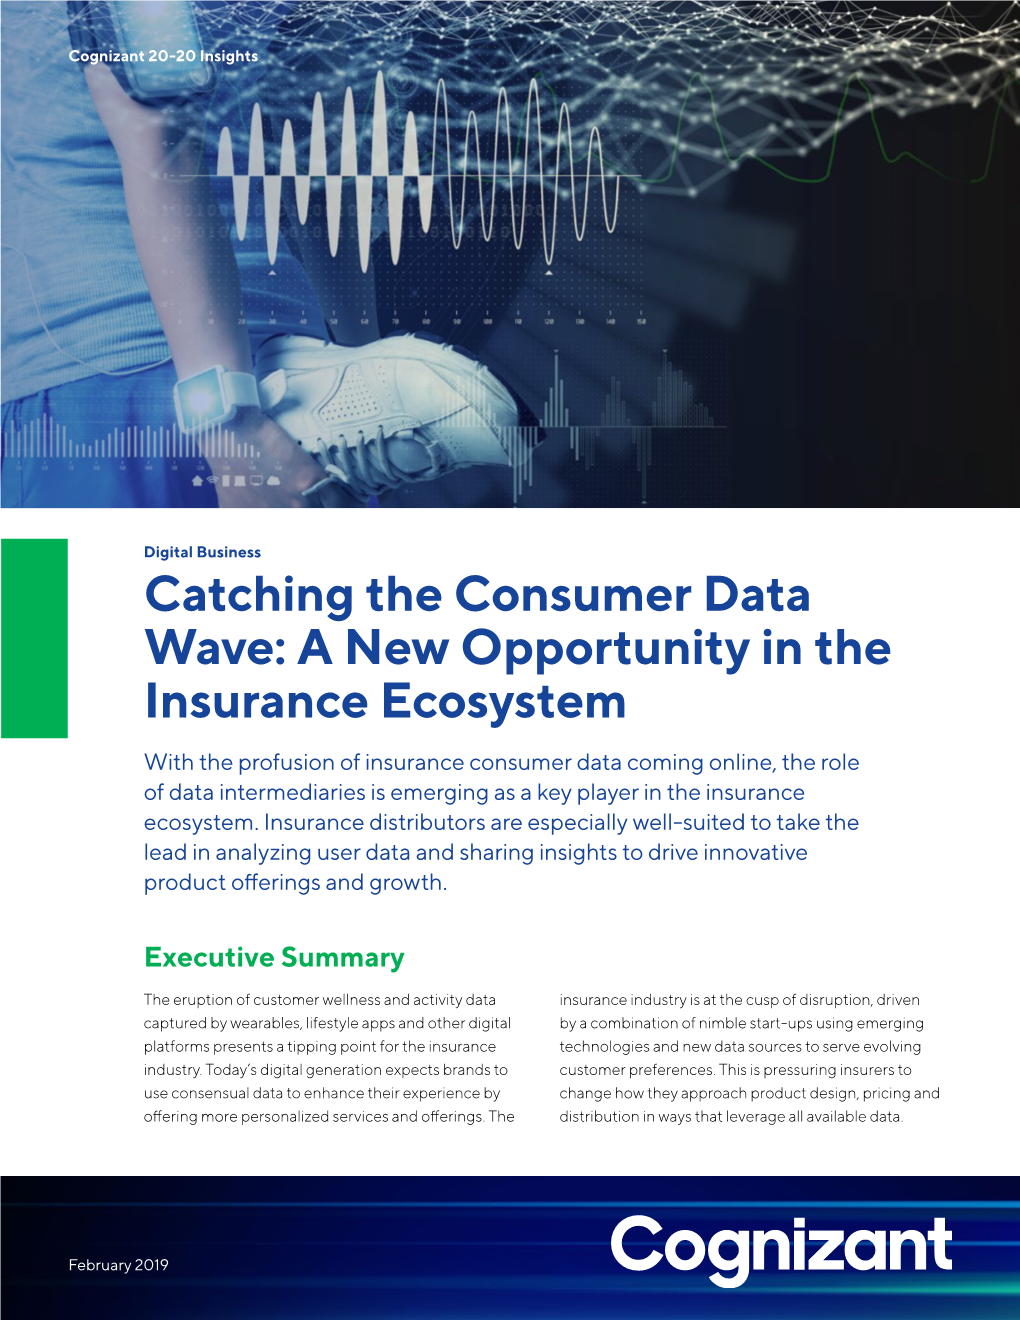 Catching the Consumer Data Wave: a New Opportunity in the Insurance